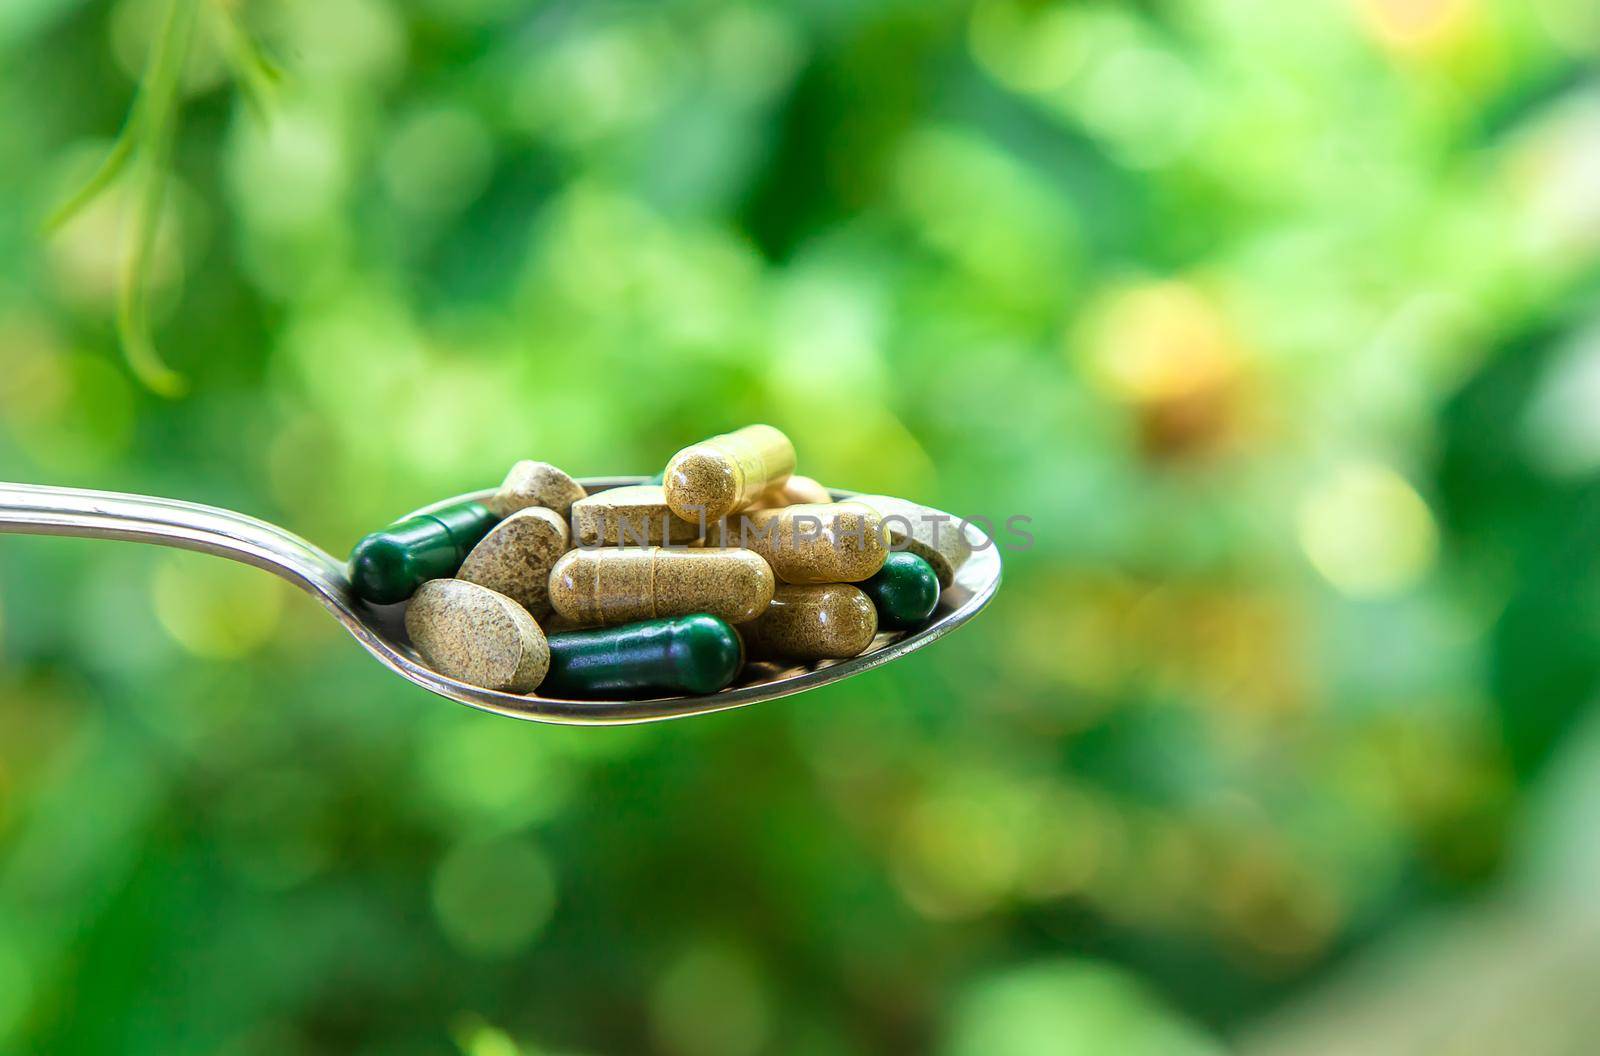 Supplements and vitamins with medicinal herbs. Selective focus. Nature.